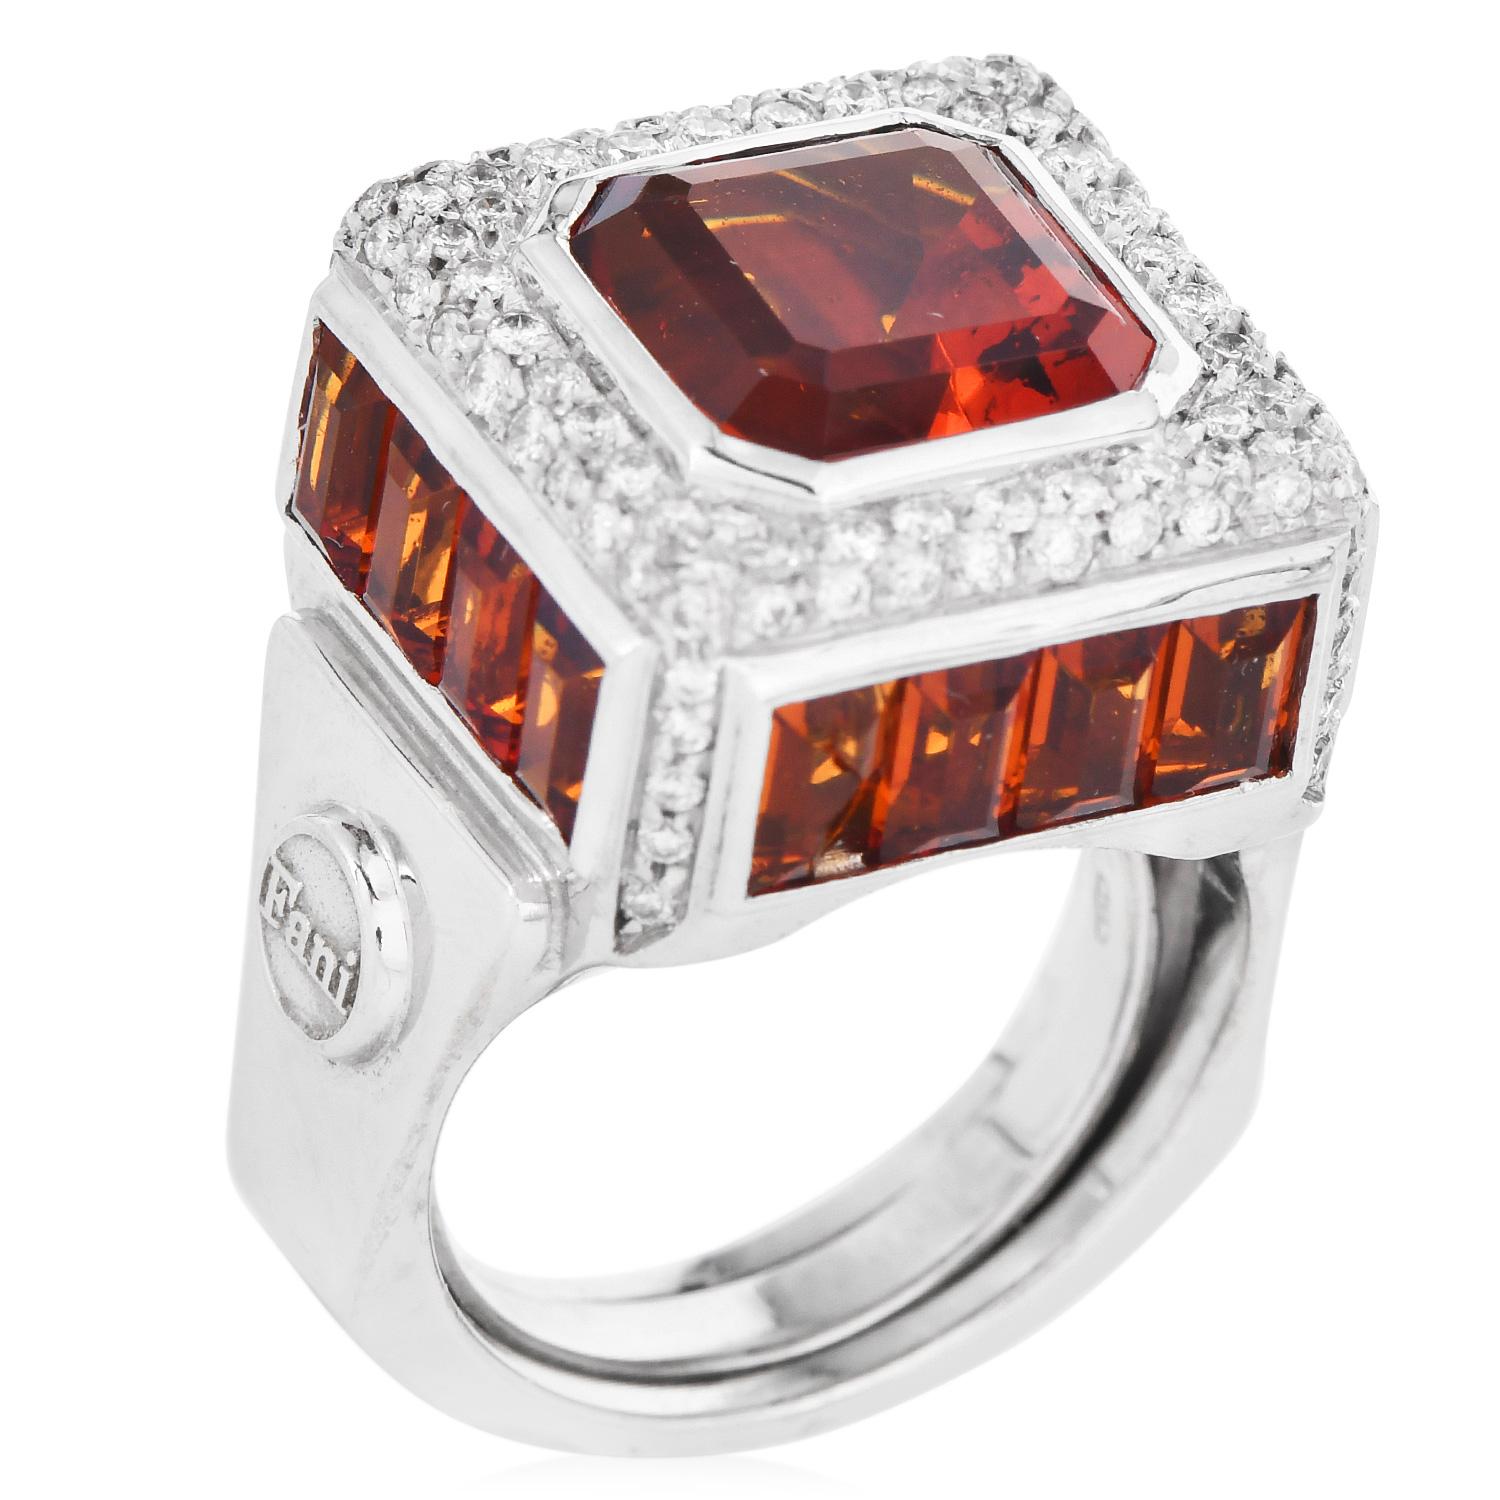 This exquisite  Italian Designer Fani Squared-shaped cocktail ring is crafted in solid 18k white gold.

The center exposes one Asscher-cut Citrine weighing approx. 5.00 carats and set in bezel. Surrounded by extra white and clean Diamonds and sided